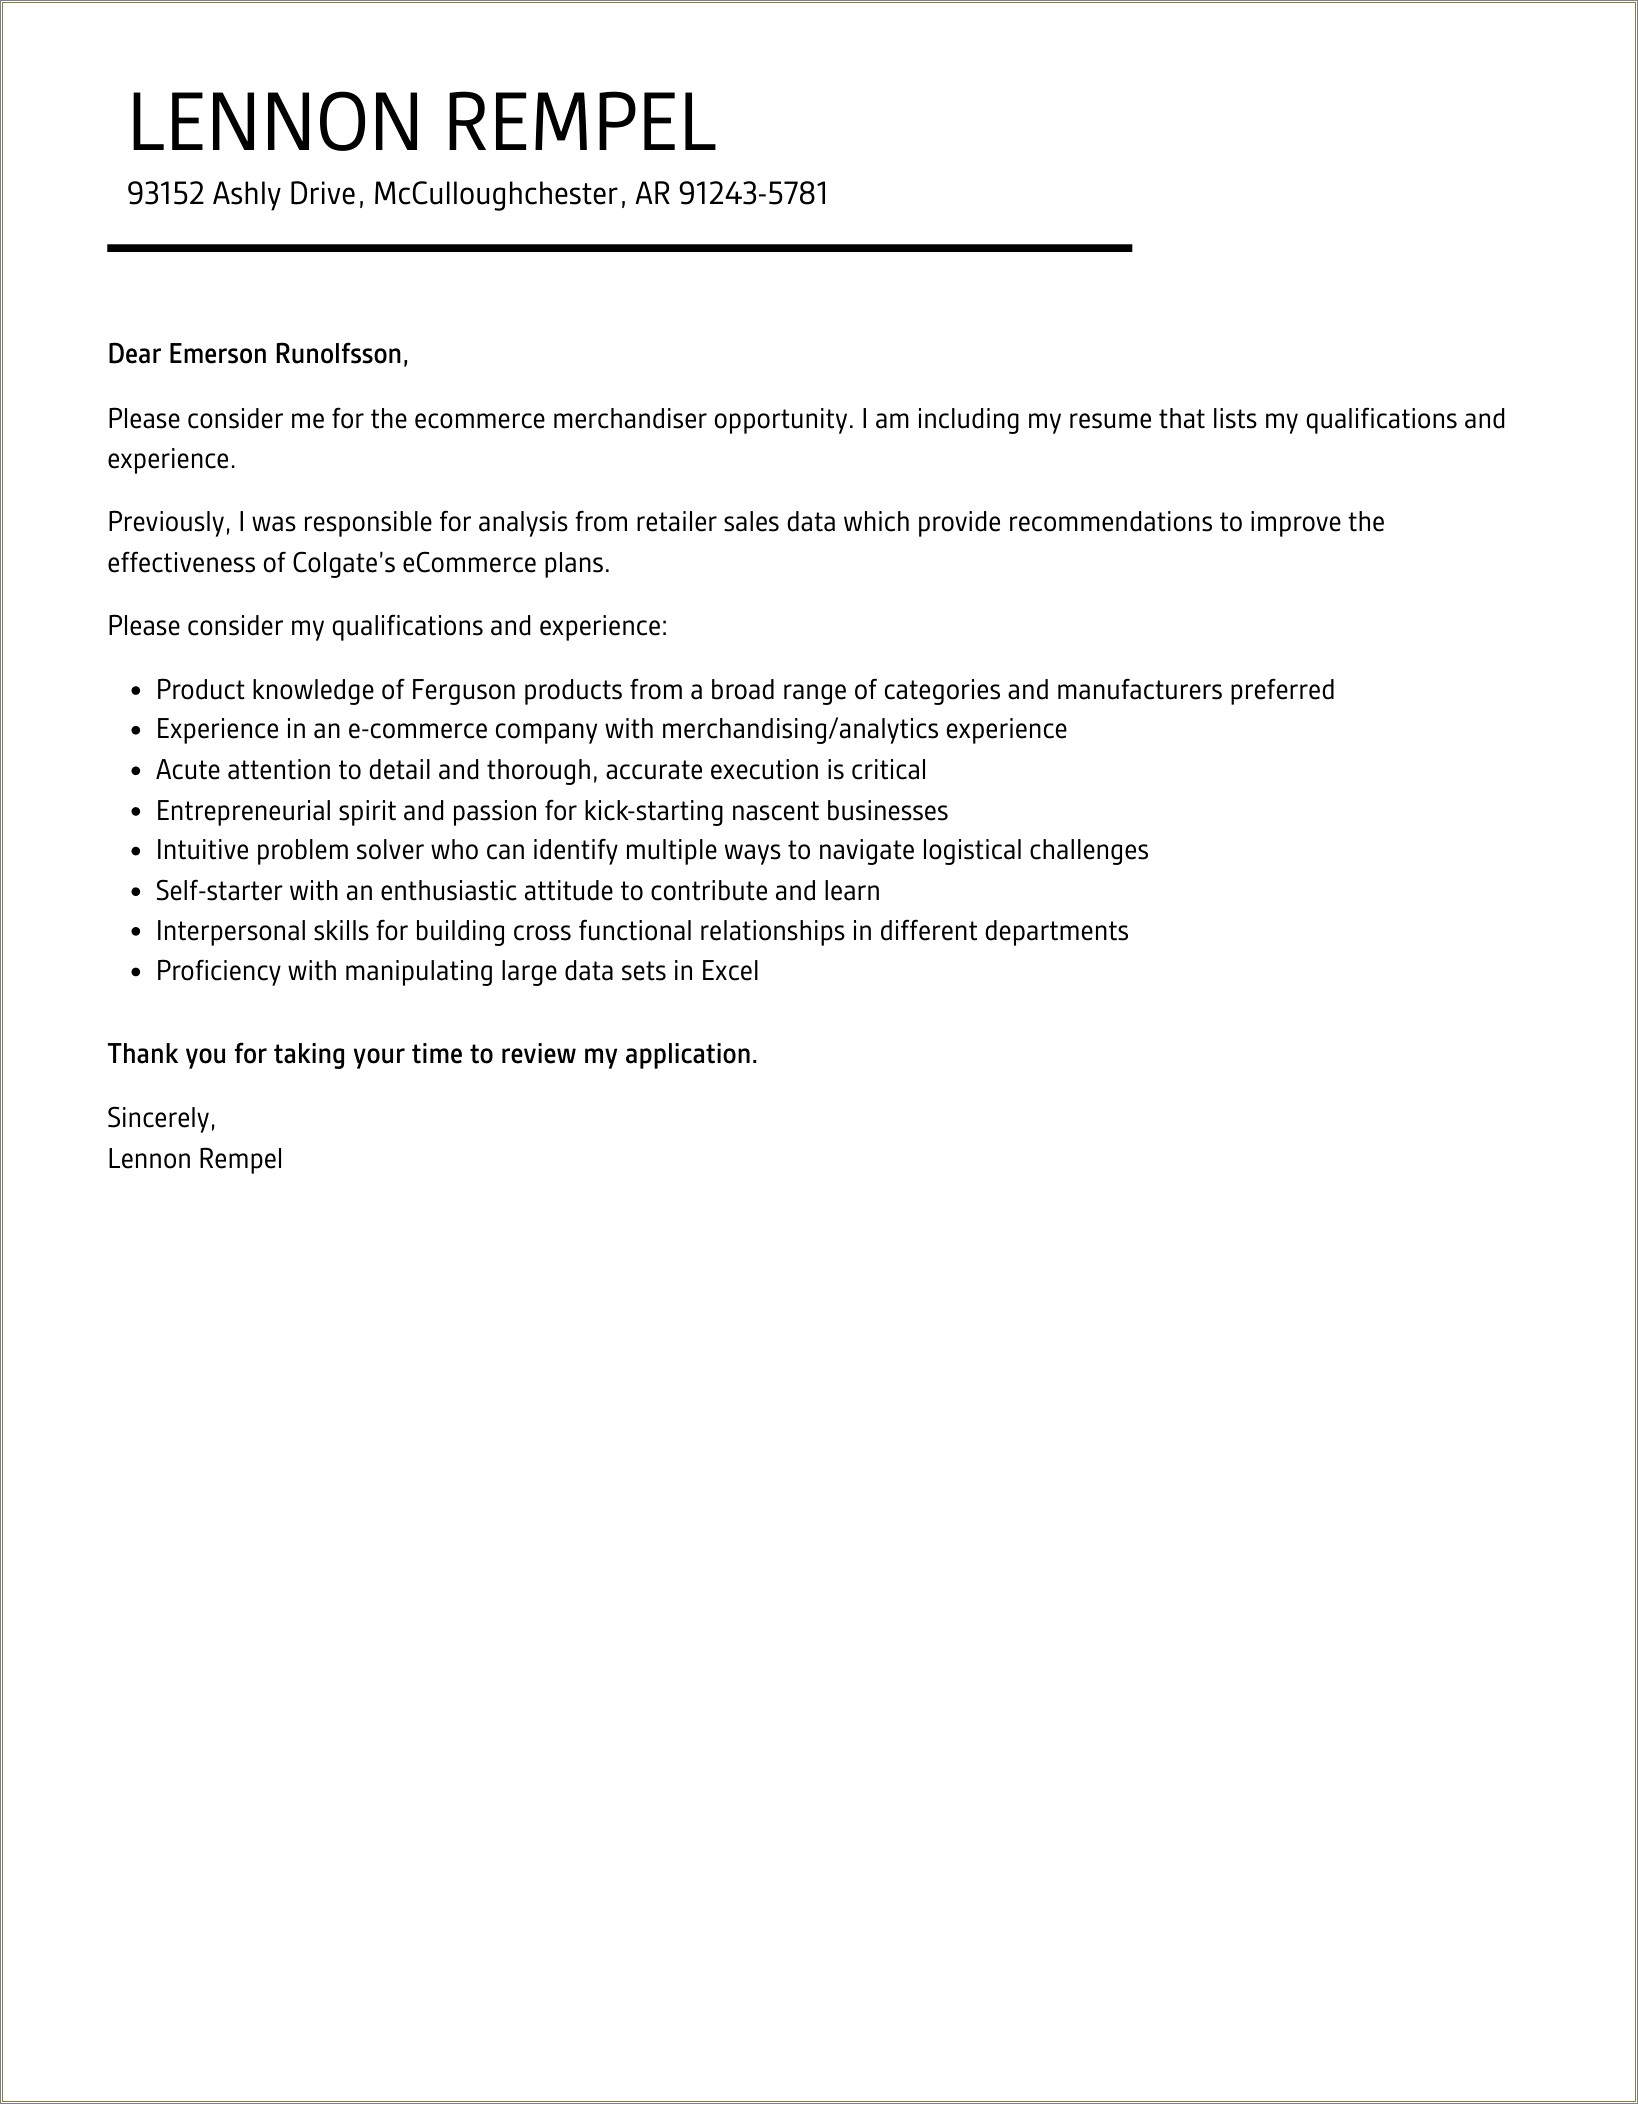 Colgate Resume And Cover Letter Guide